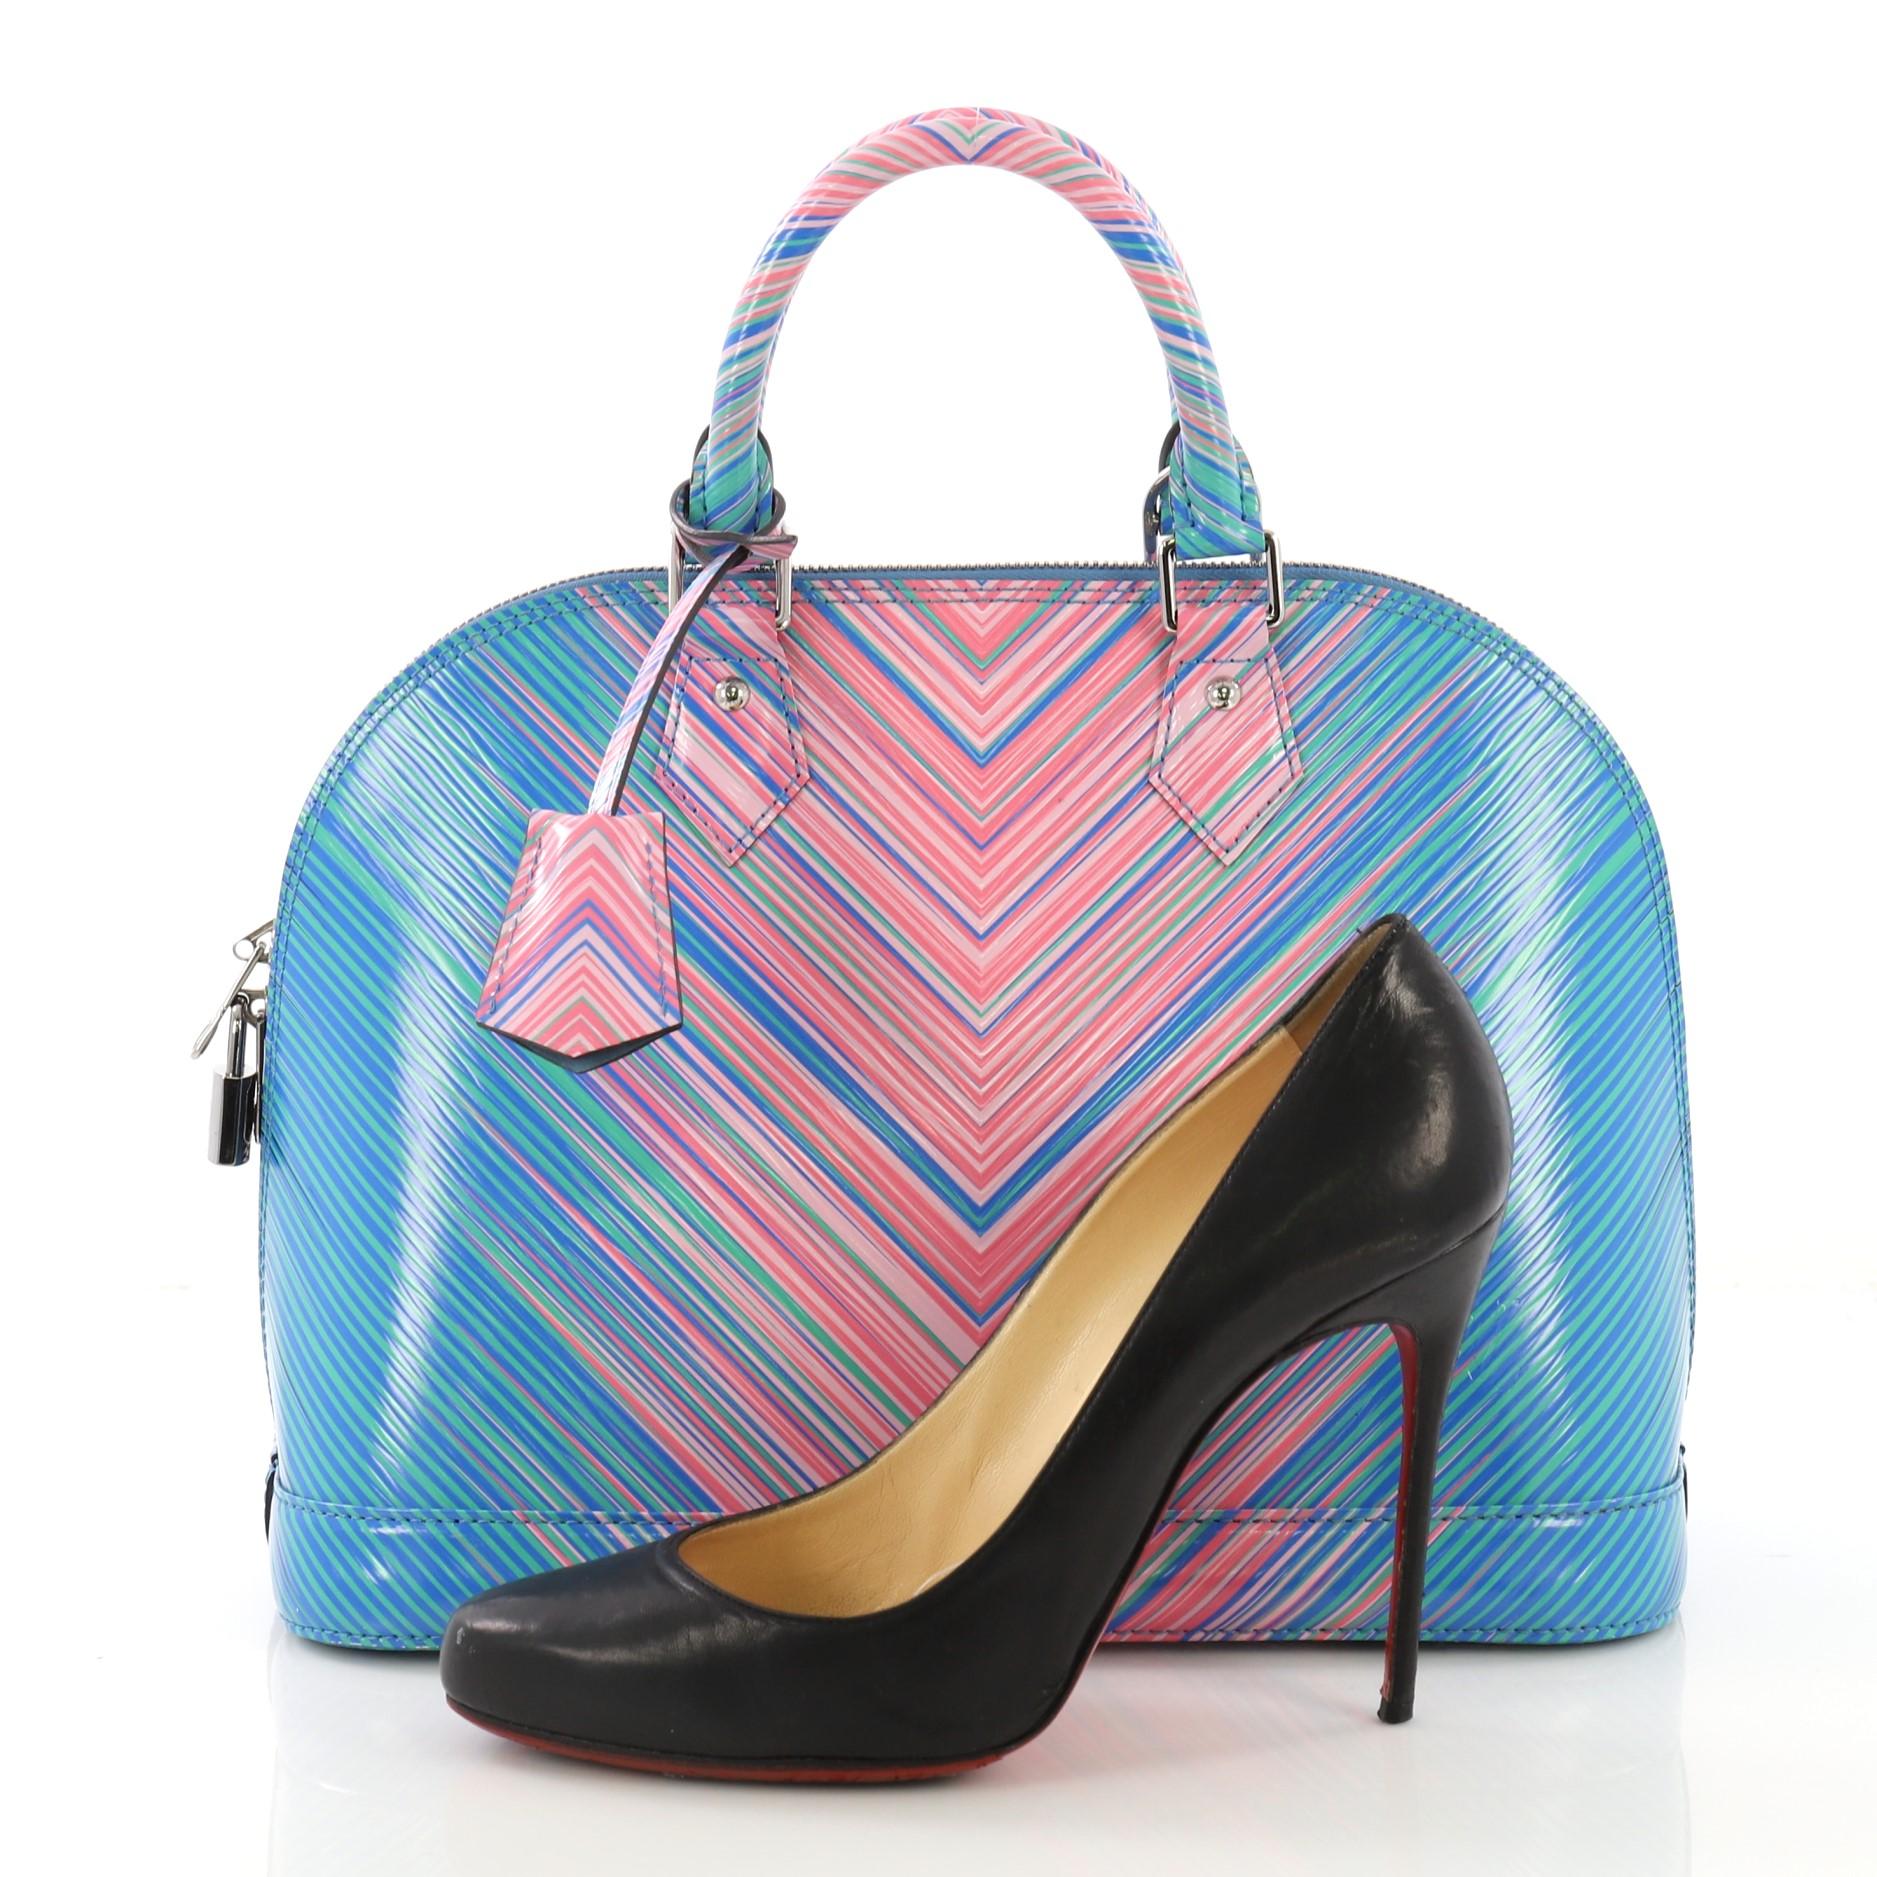 This Louis Vuitton Alma Handbag Limited Edition Tropical Epi Leather PM, crafted in multicolor epi leather, features dual rolled handles, protective base studs, tropical print, and silver-tone hardware. Its zip-around closure opens to a light blue